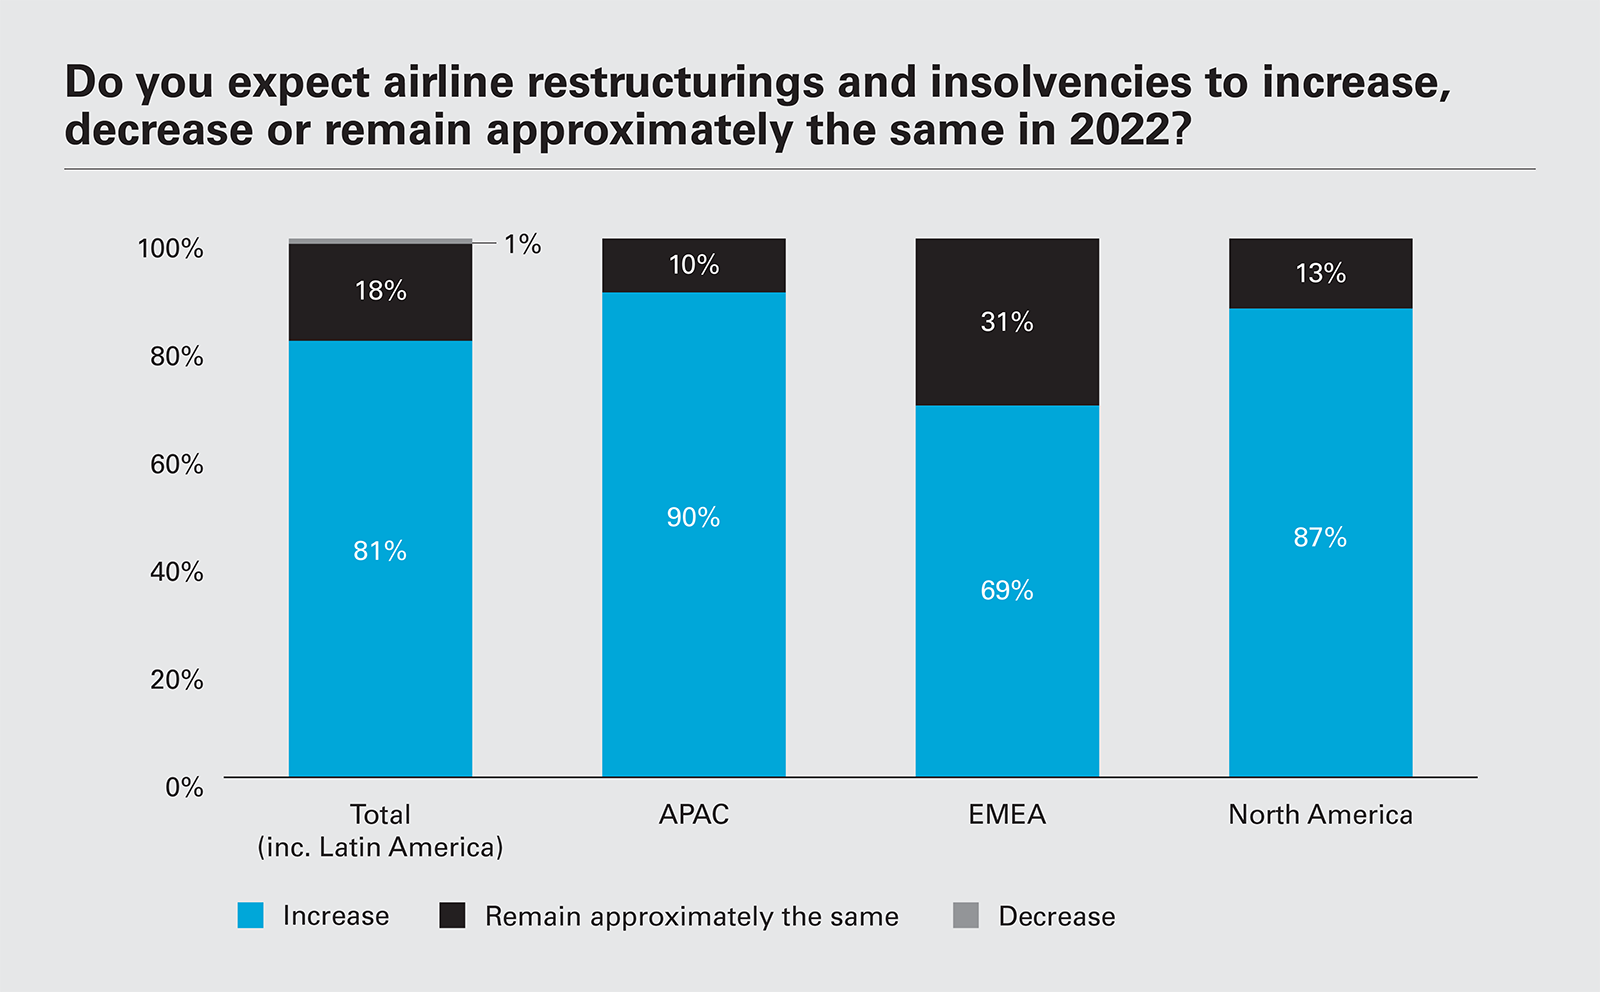 Do you expect airline restructurings and insolvencies to increase, decrease or remain approximately the same in 2022?